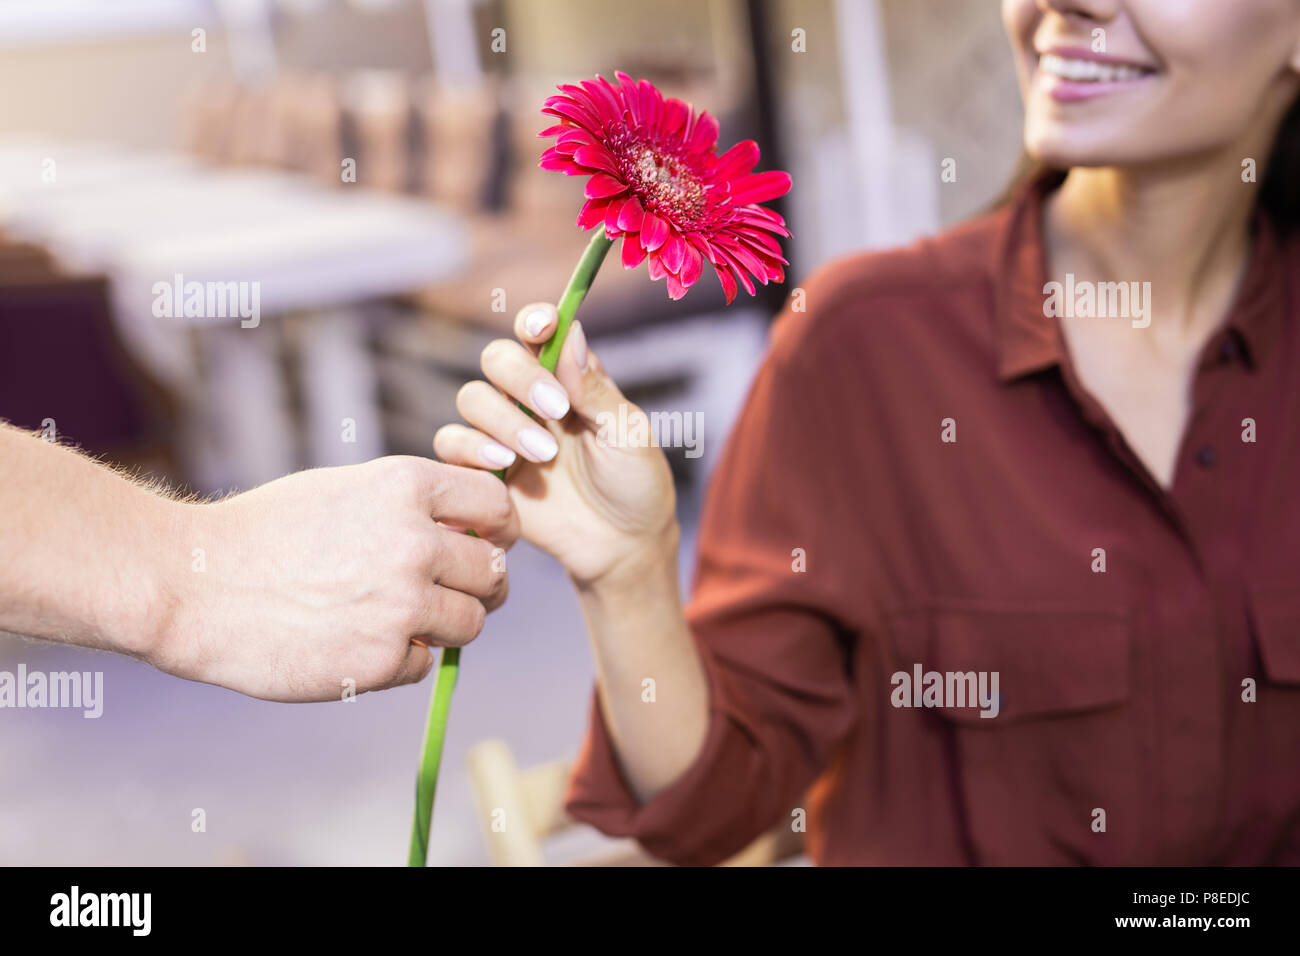 Young woman feeling contended while receiving flower Stock Photo